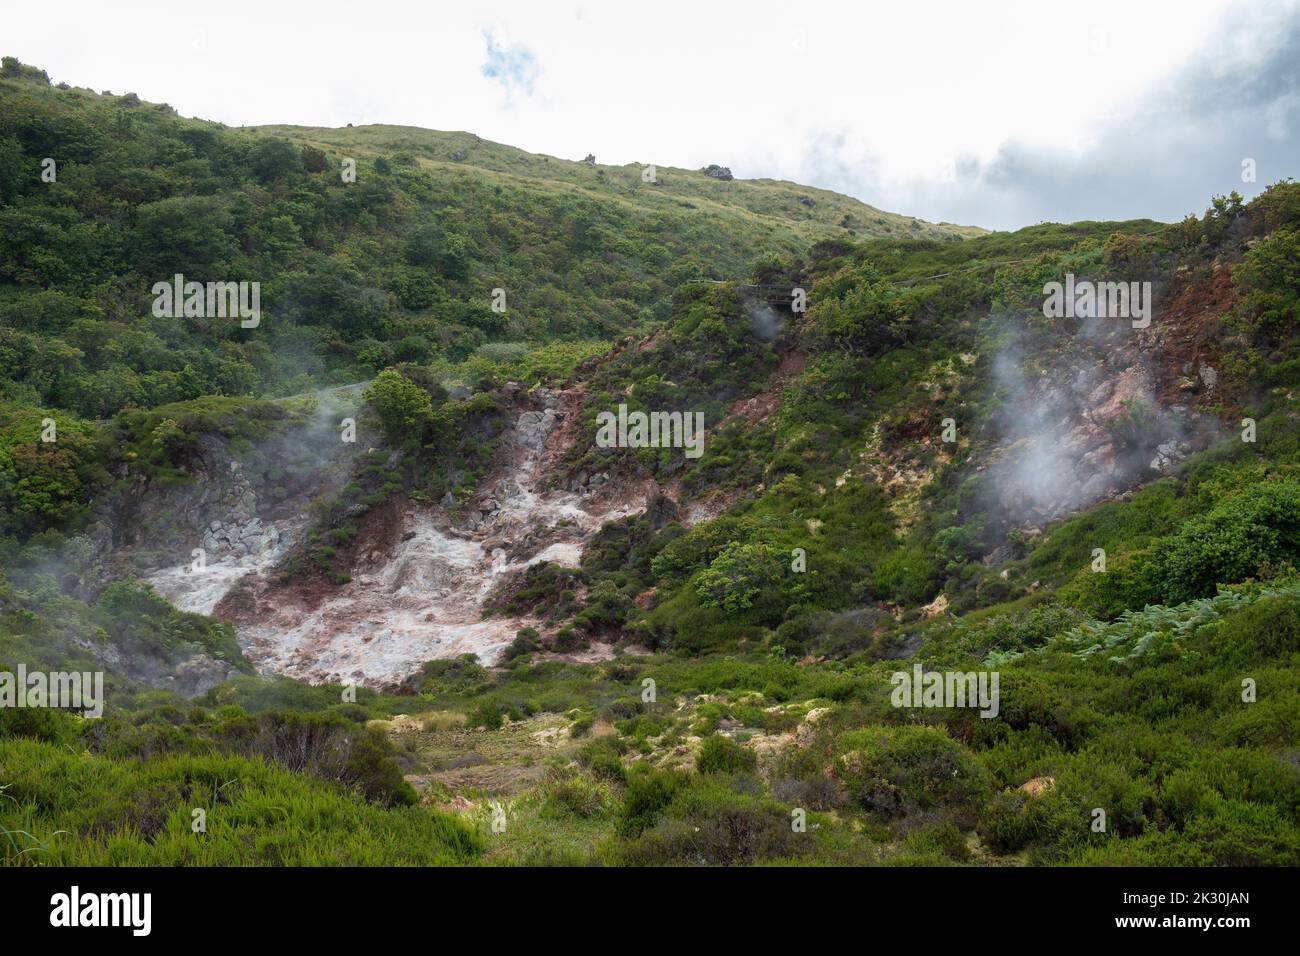 Portugal, Azores, Sulfuric vapors coming out of Furnas do Enxofre fumaroles Stock Photo